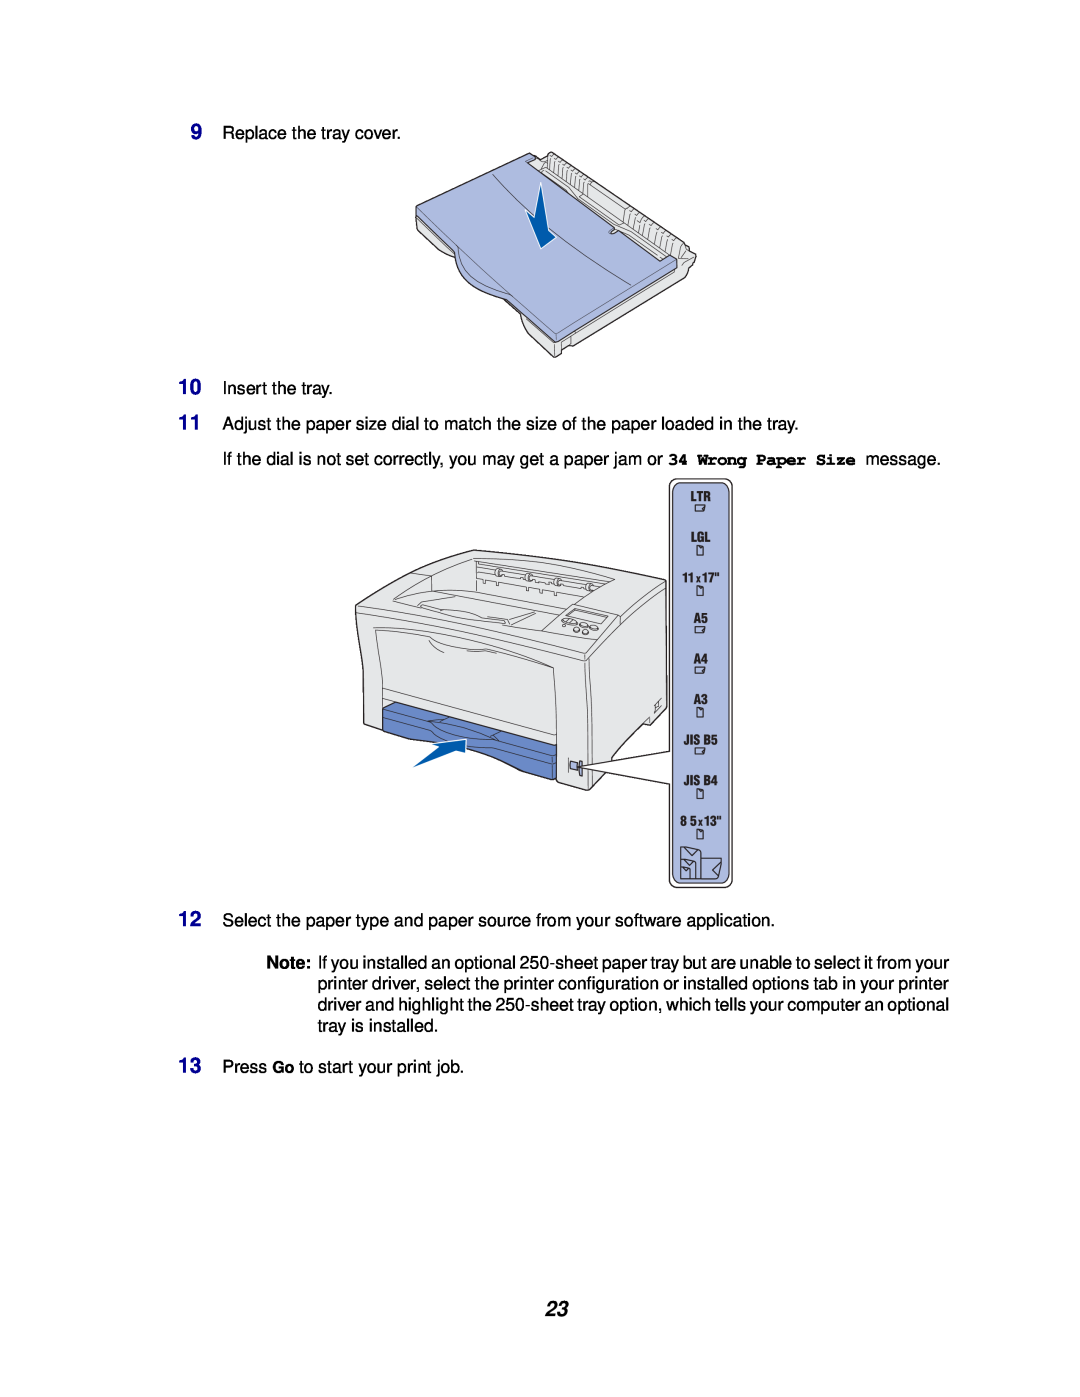 Lexmark 812 manual Replace the tray cover 10 Insert the tray, Press Go to start your print job 